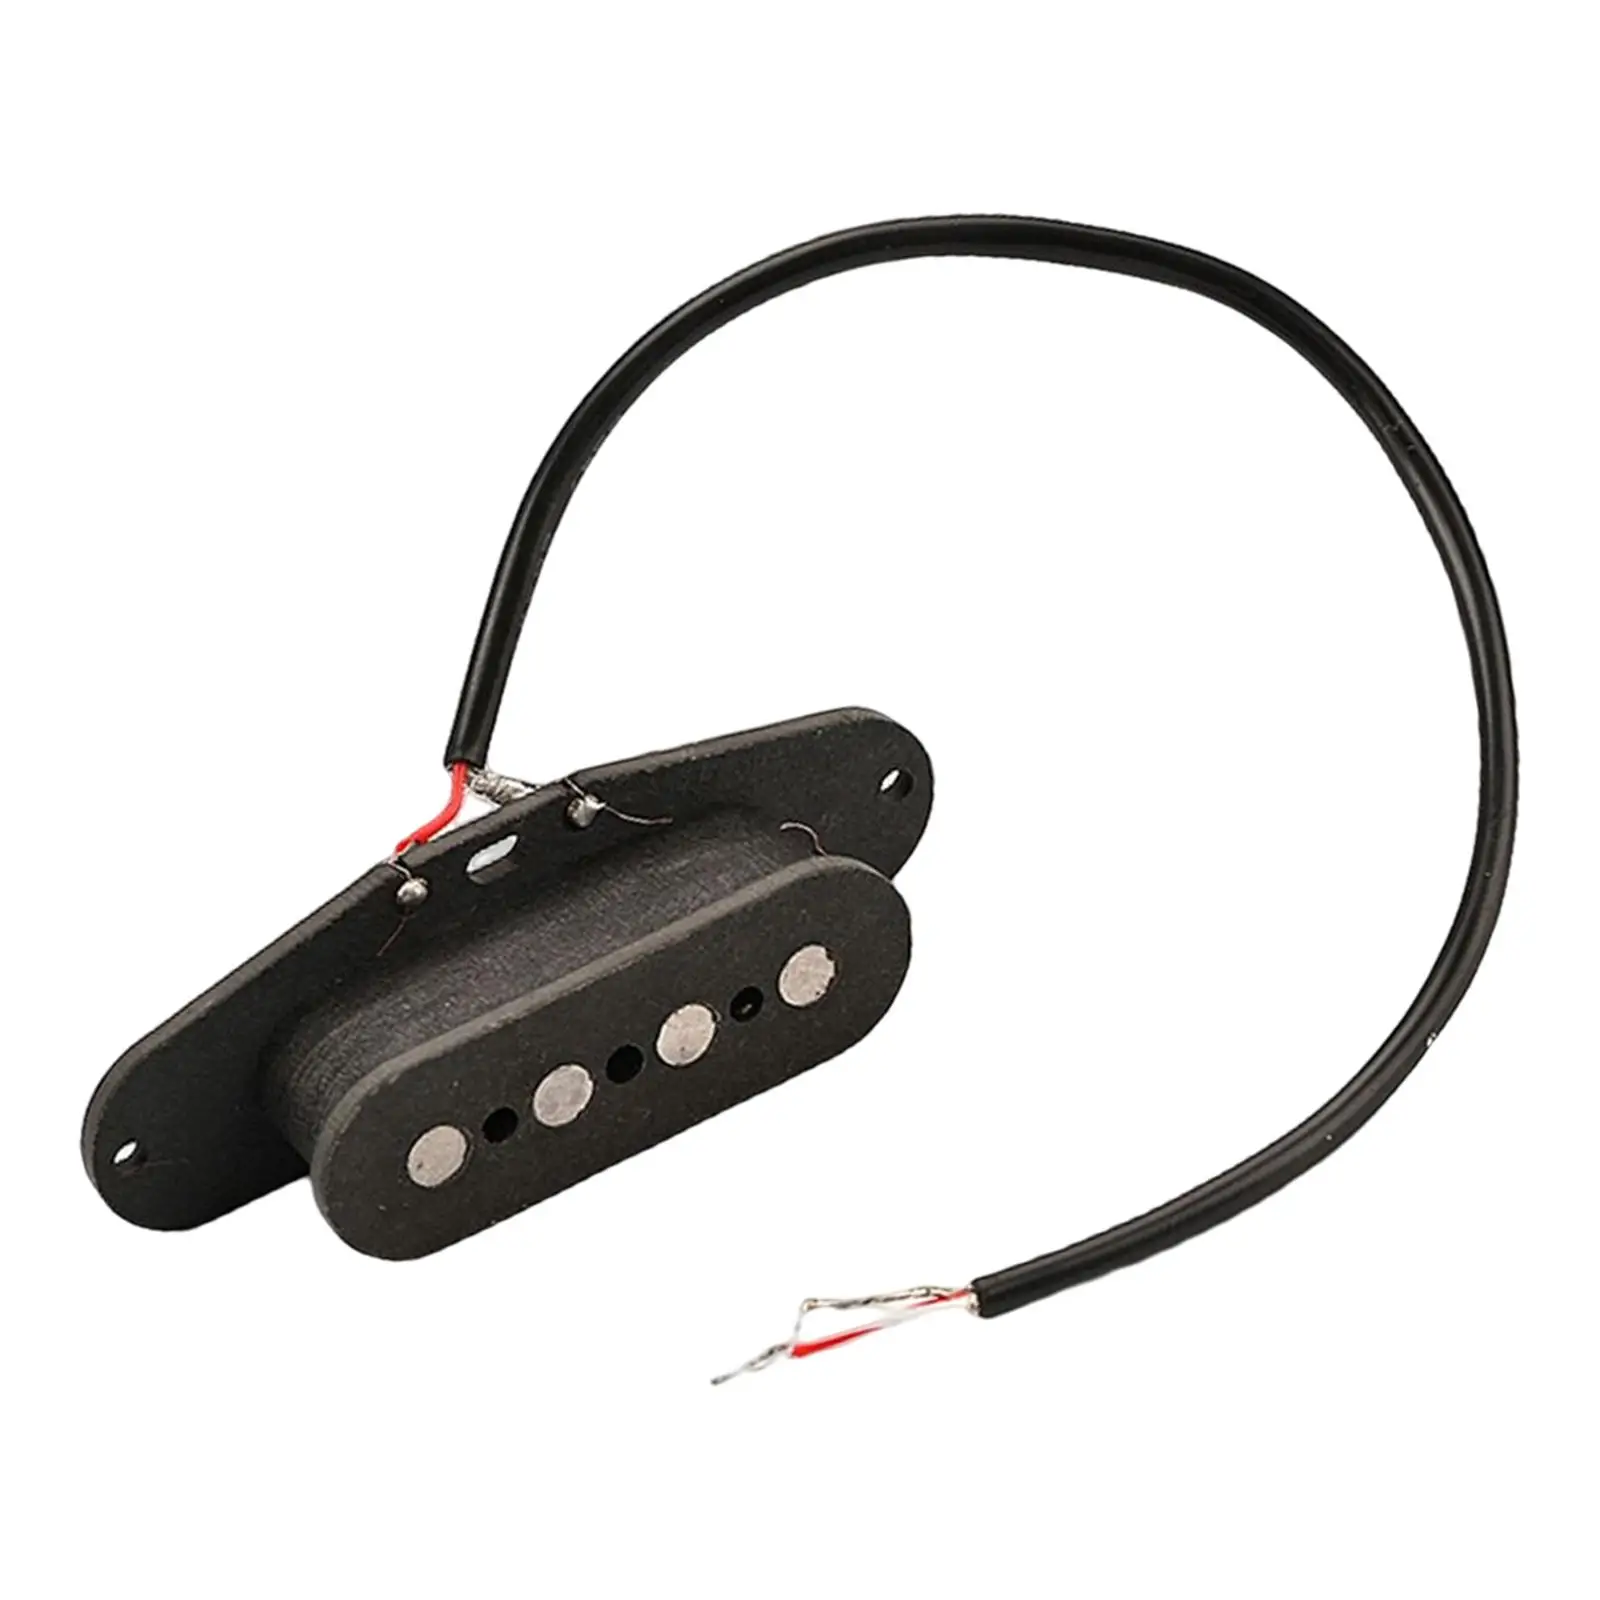 4 String Pickup Musical Instrument Tools Fidelity Wider Audio for Players